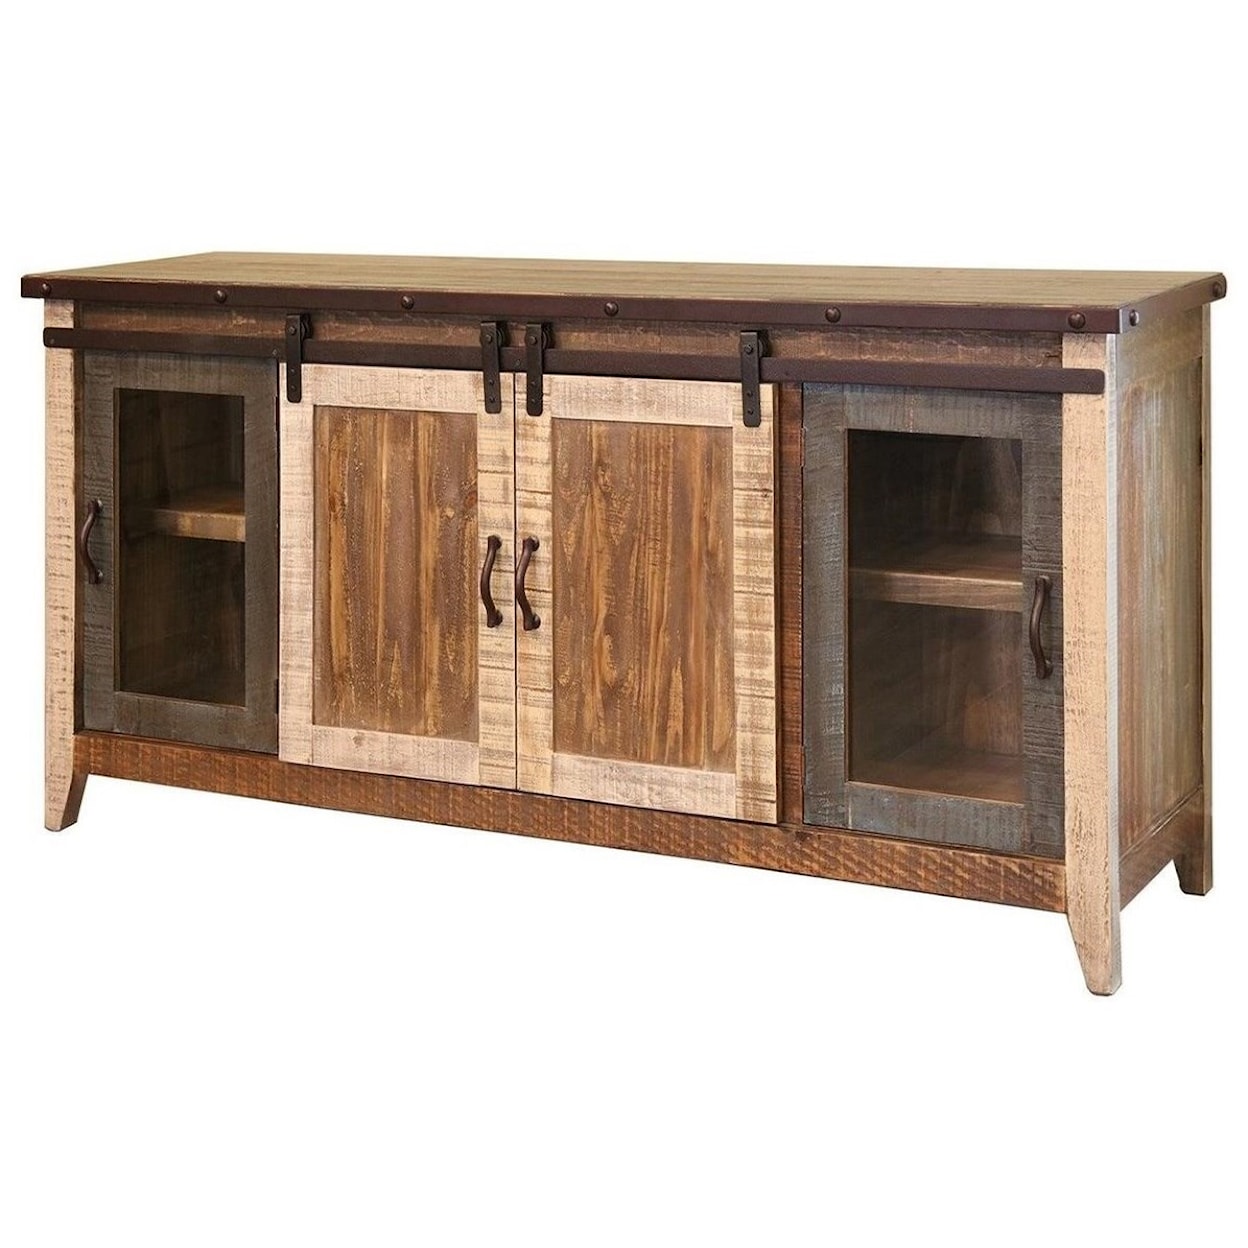 IFD 900 Antique 70" TV Stand with Sliding Doors